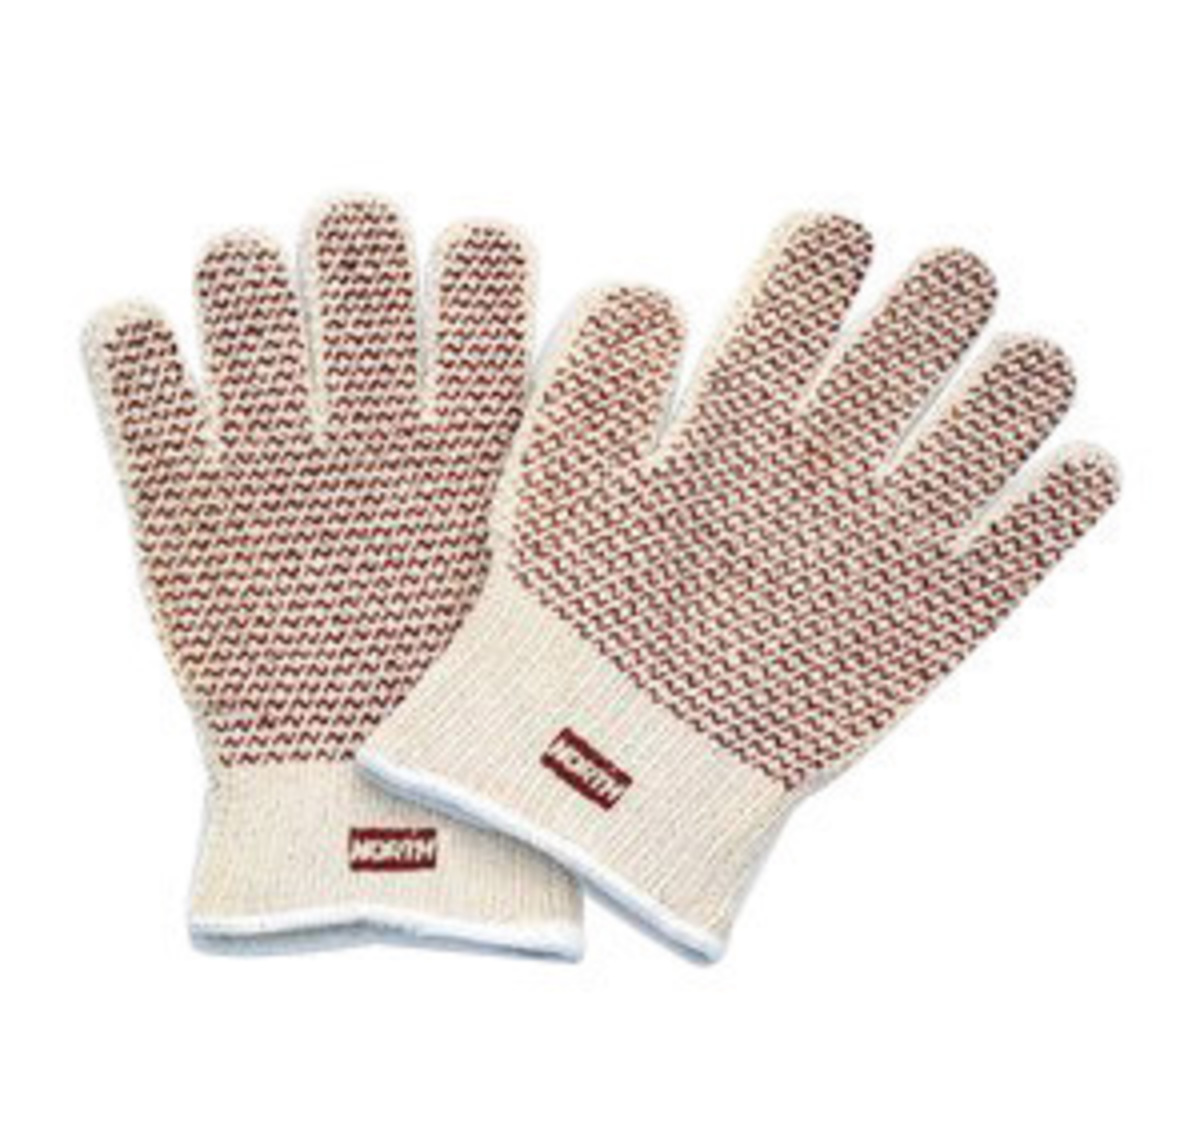 Honeywell White 10 Gauge Cotton Hot Mill Gloves With Knit Wrist